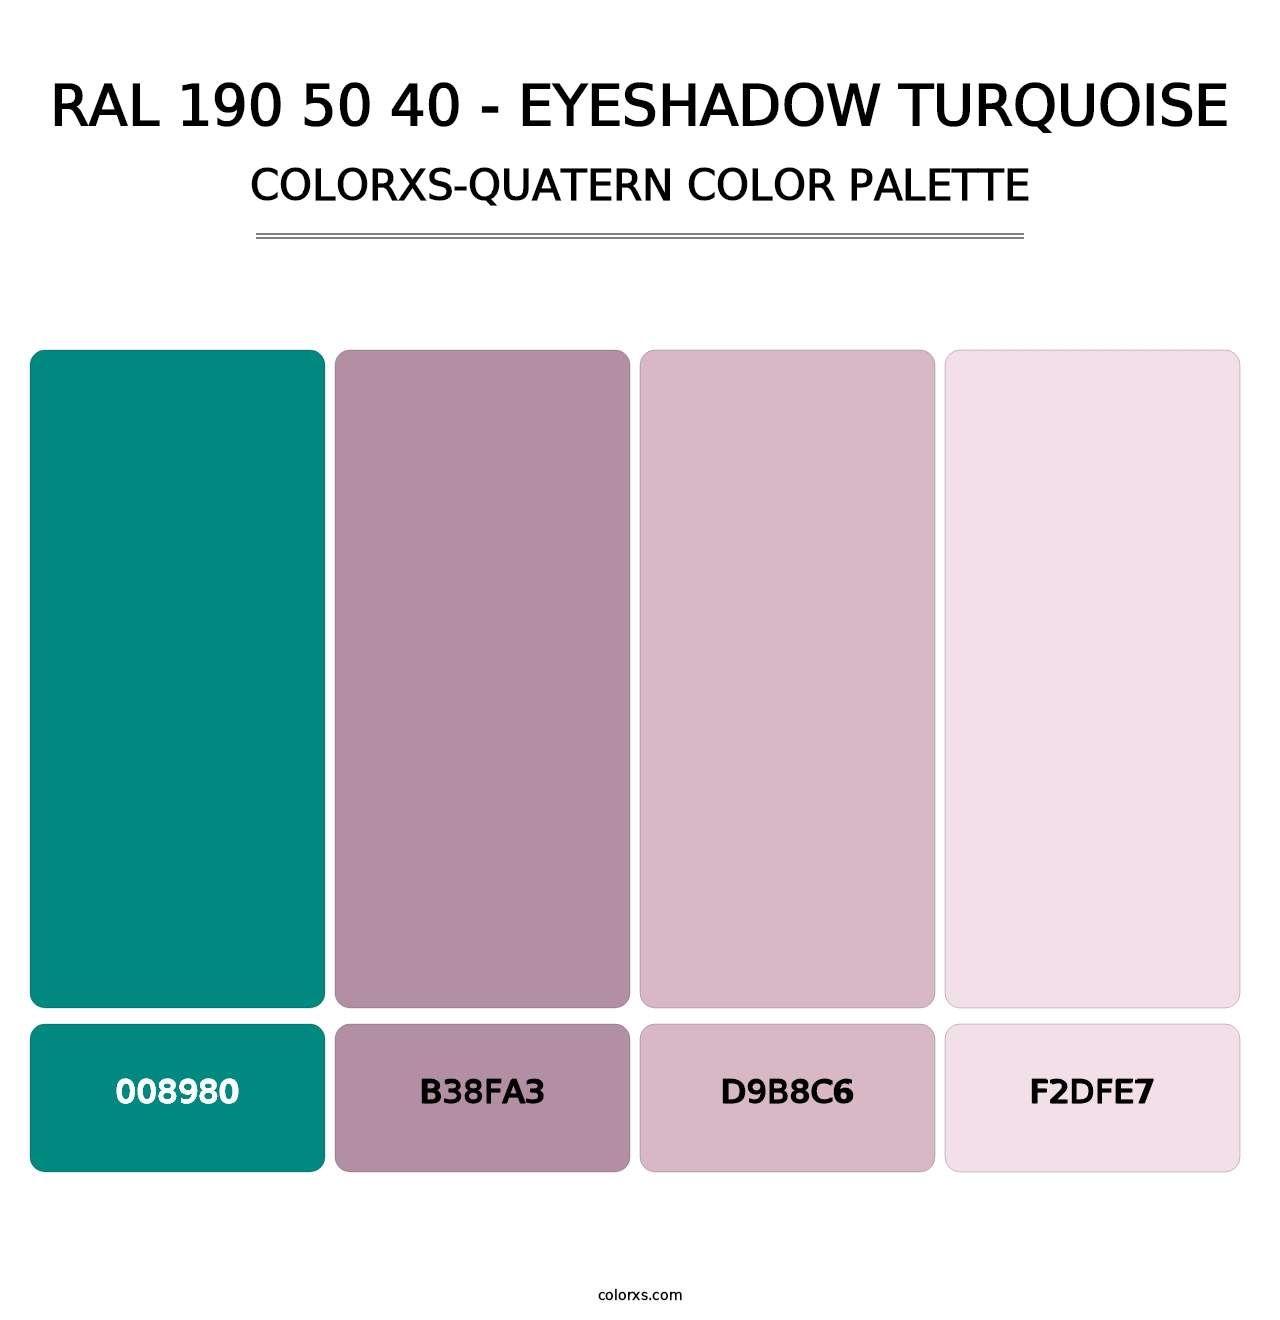 RAL 190 50 40 - Eyeshadow Turquoise - Colorxs Quatern Palette